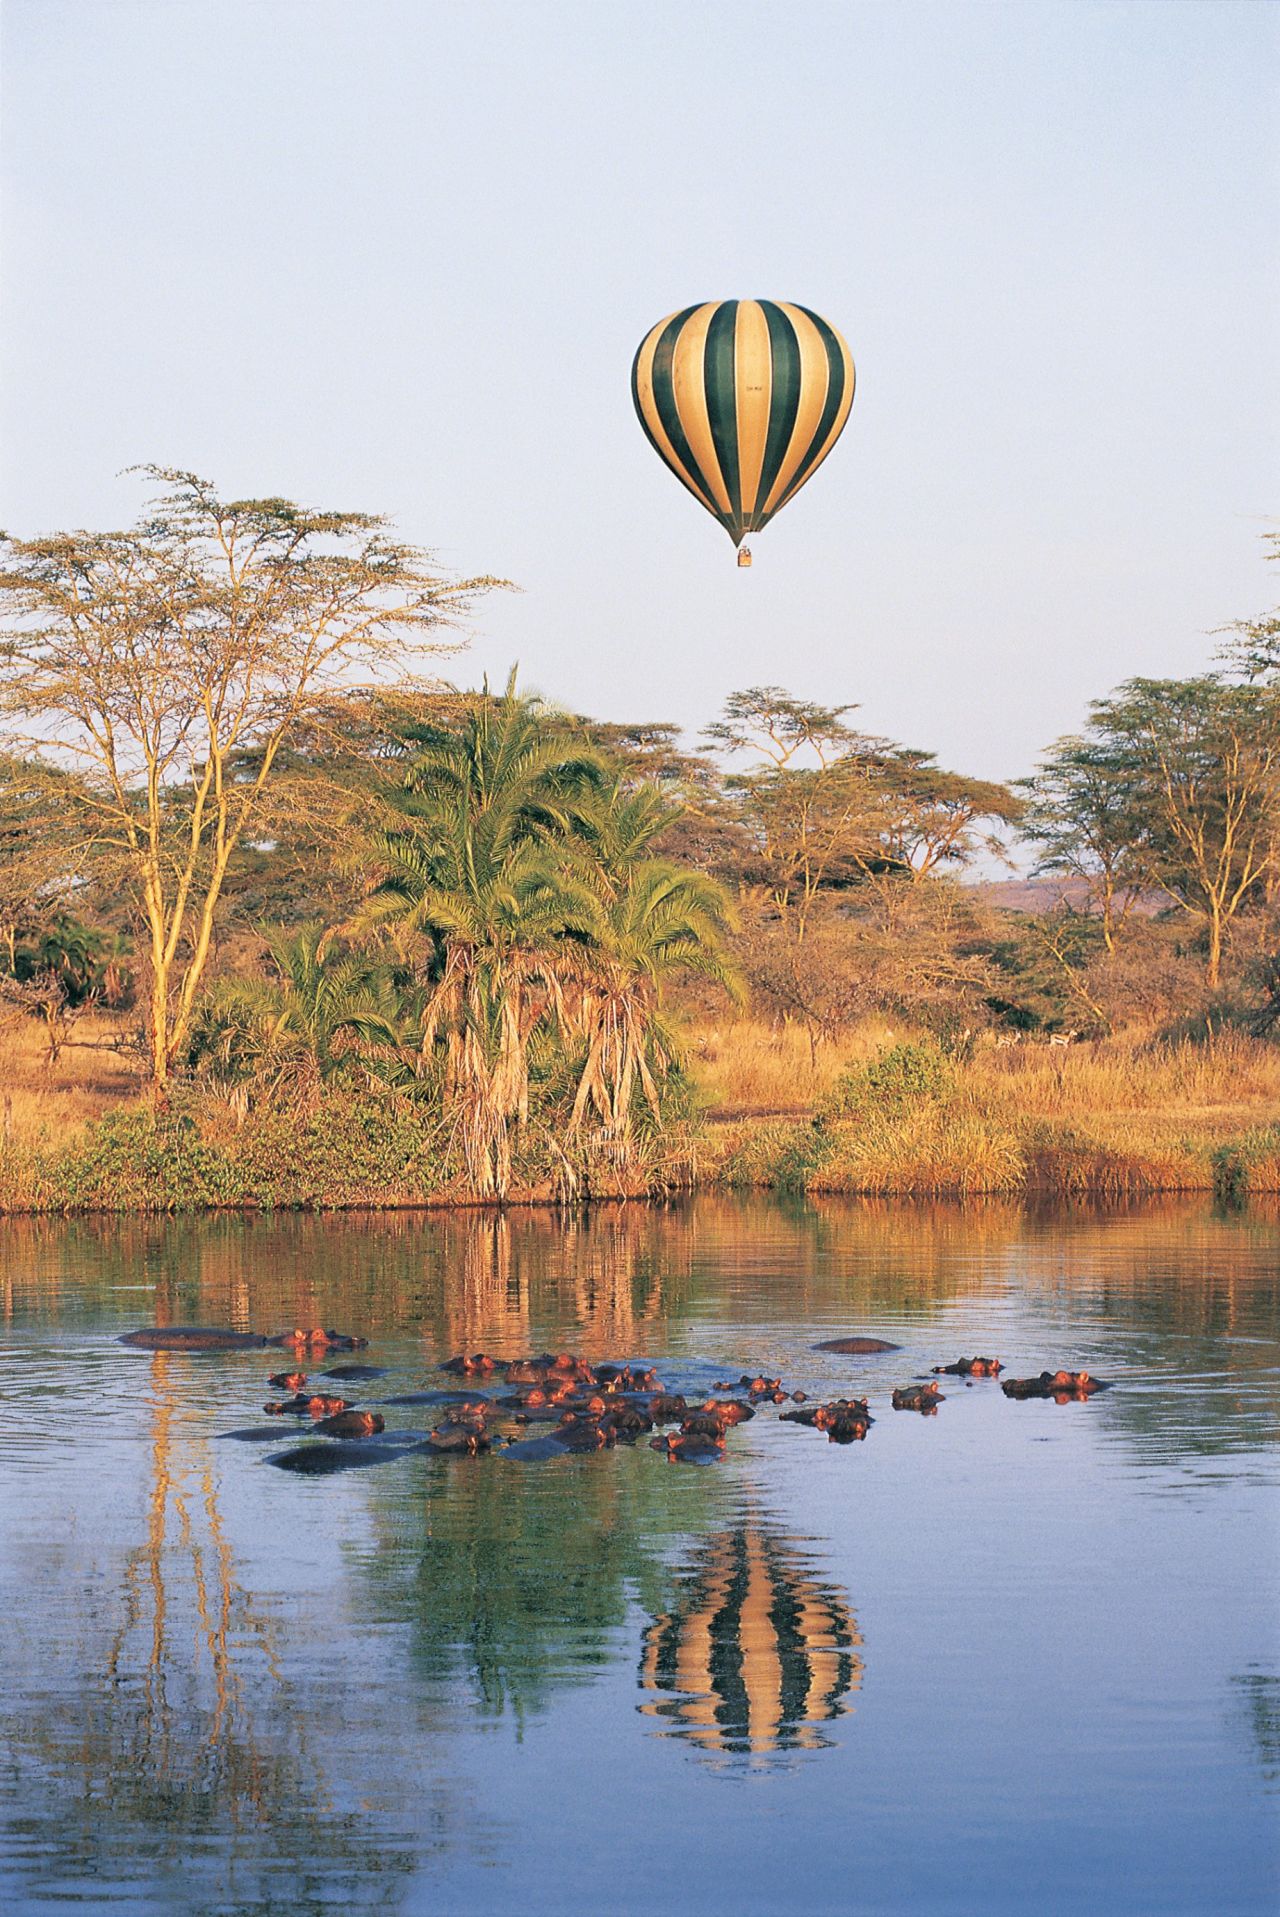 <strong>Serengeti balloon safari (Tanzania)</strong>: This hot air balloon ride over the Serengeti gives amazing views of the great migration and African bush without the unwanted dust bath. 